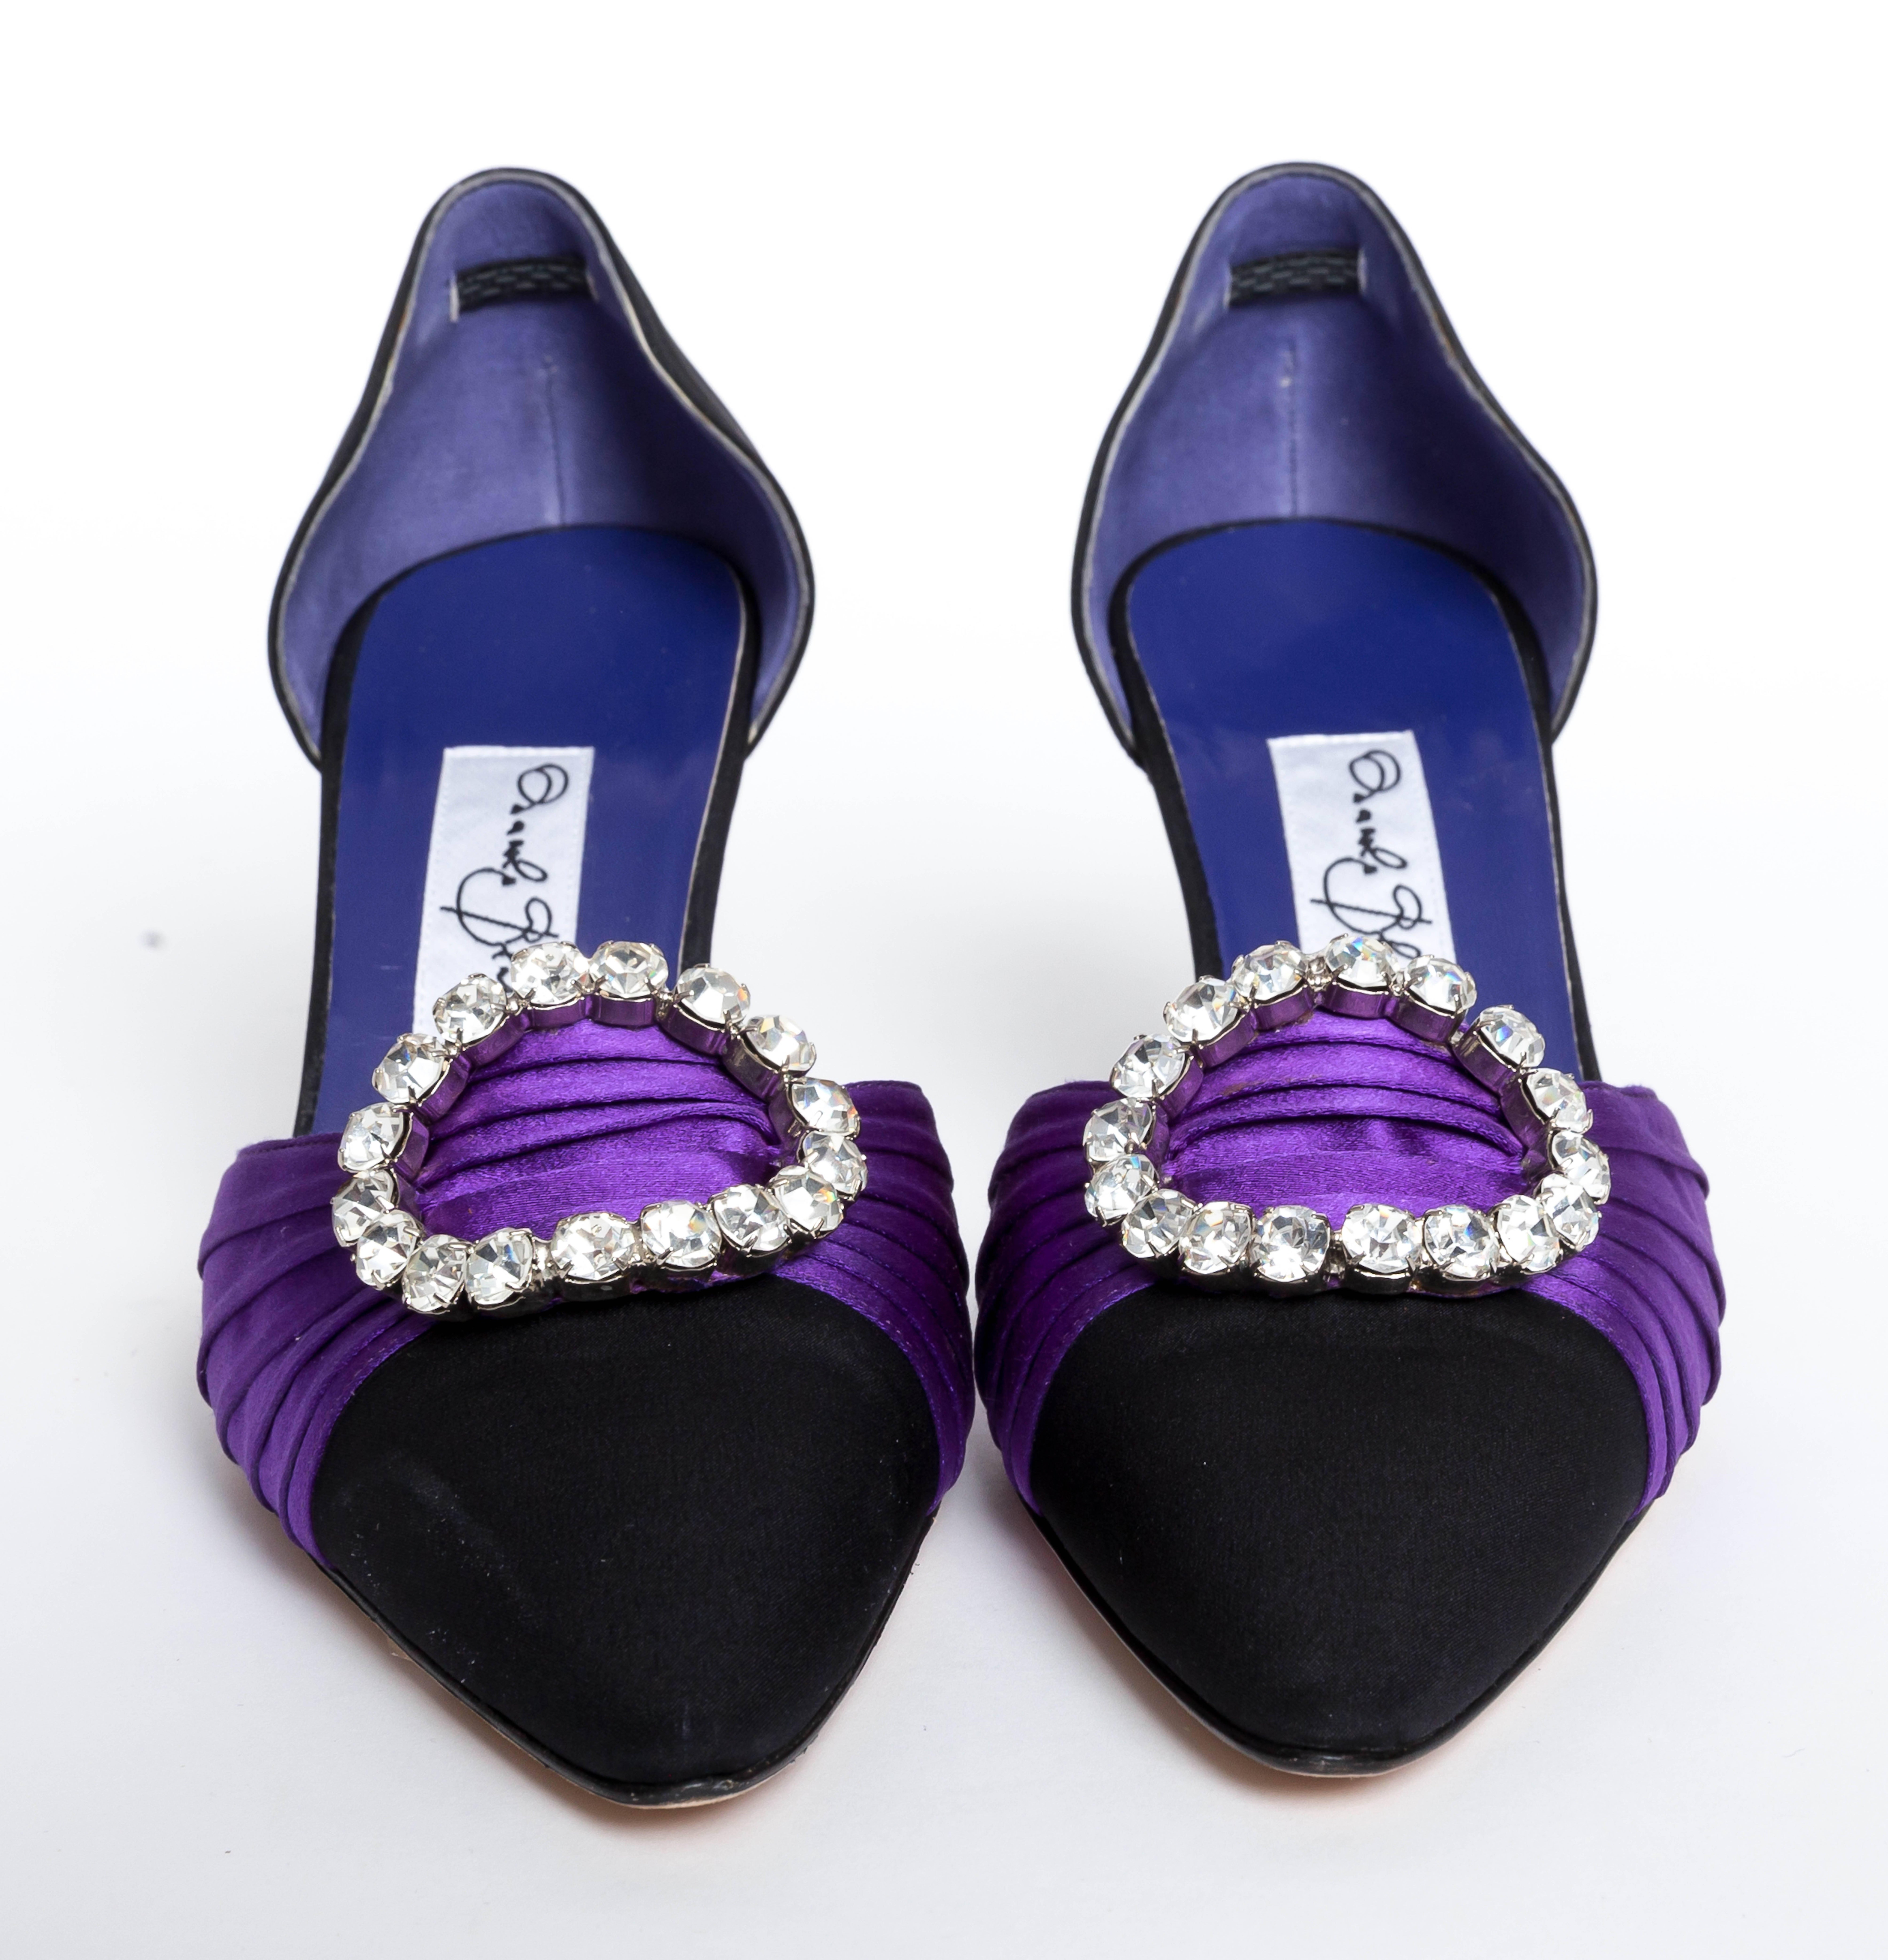 These stunning Manolo Blahnik Silk Pumps were hand made for our client. They are signed by Mr. Blahnik and have never been worn.
Huge crystal buckles adorn the front of each shoe and even the shoe's label is unique to these shoes. 
Purple ruched